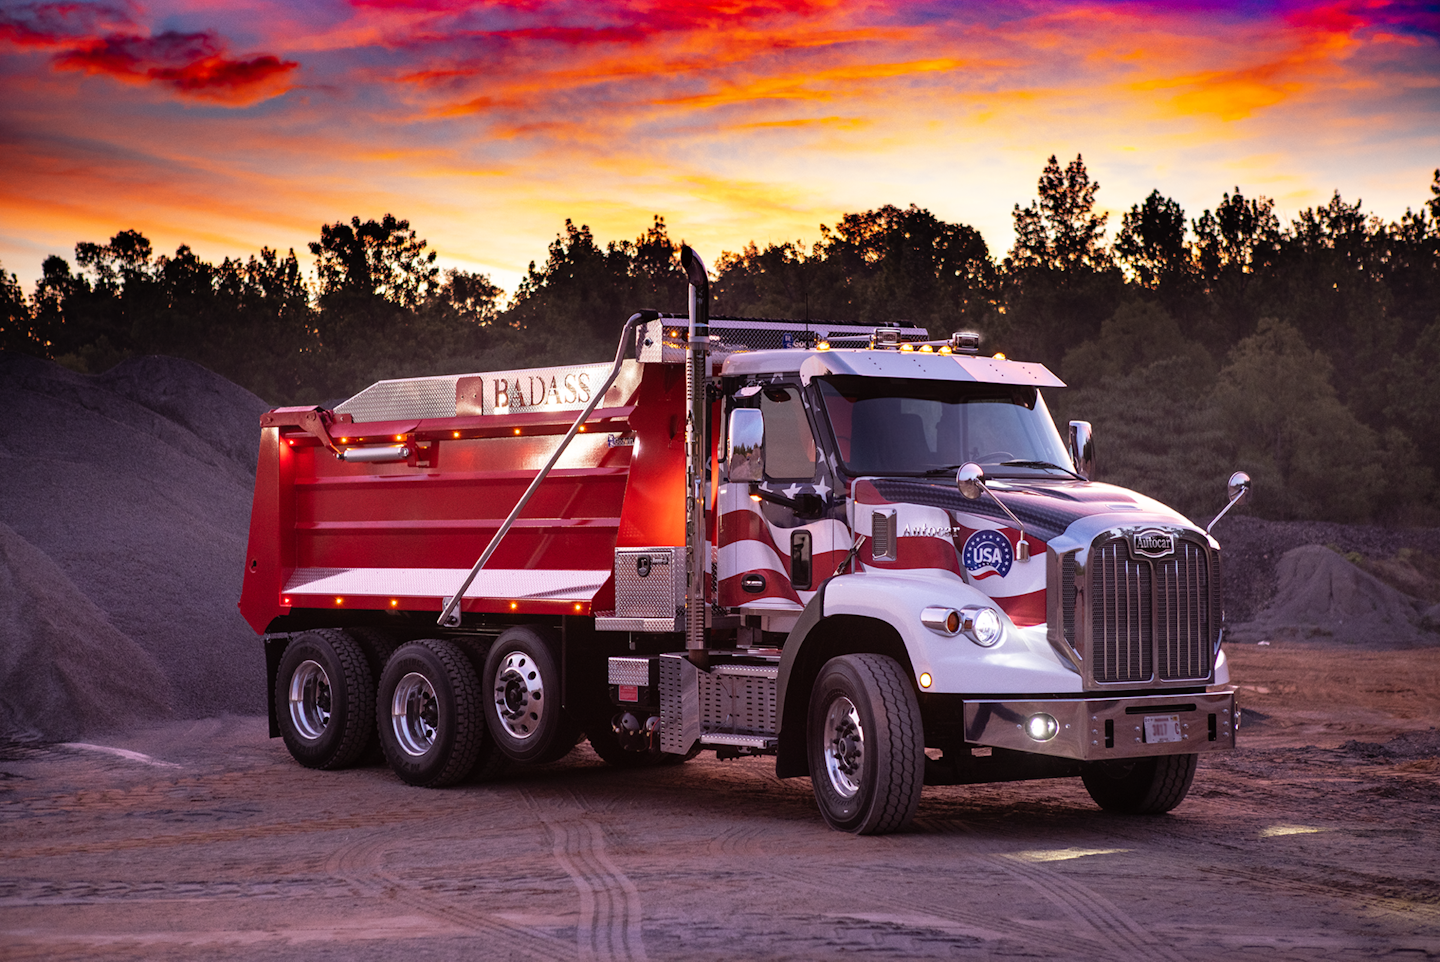 Autocar Announces the Only BADASS Dump Truck in North America | Grading